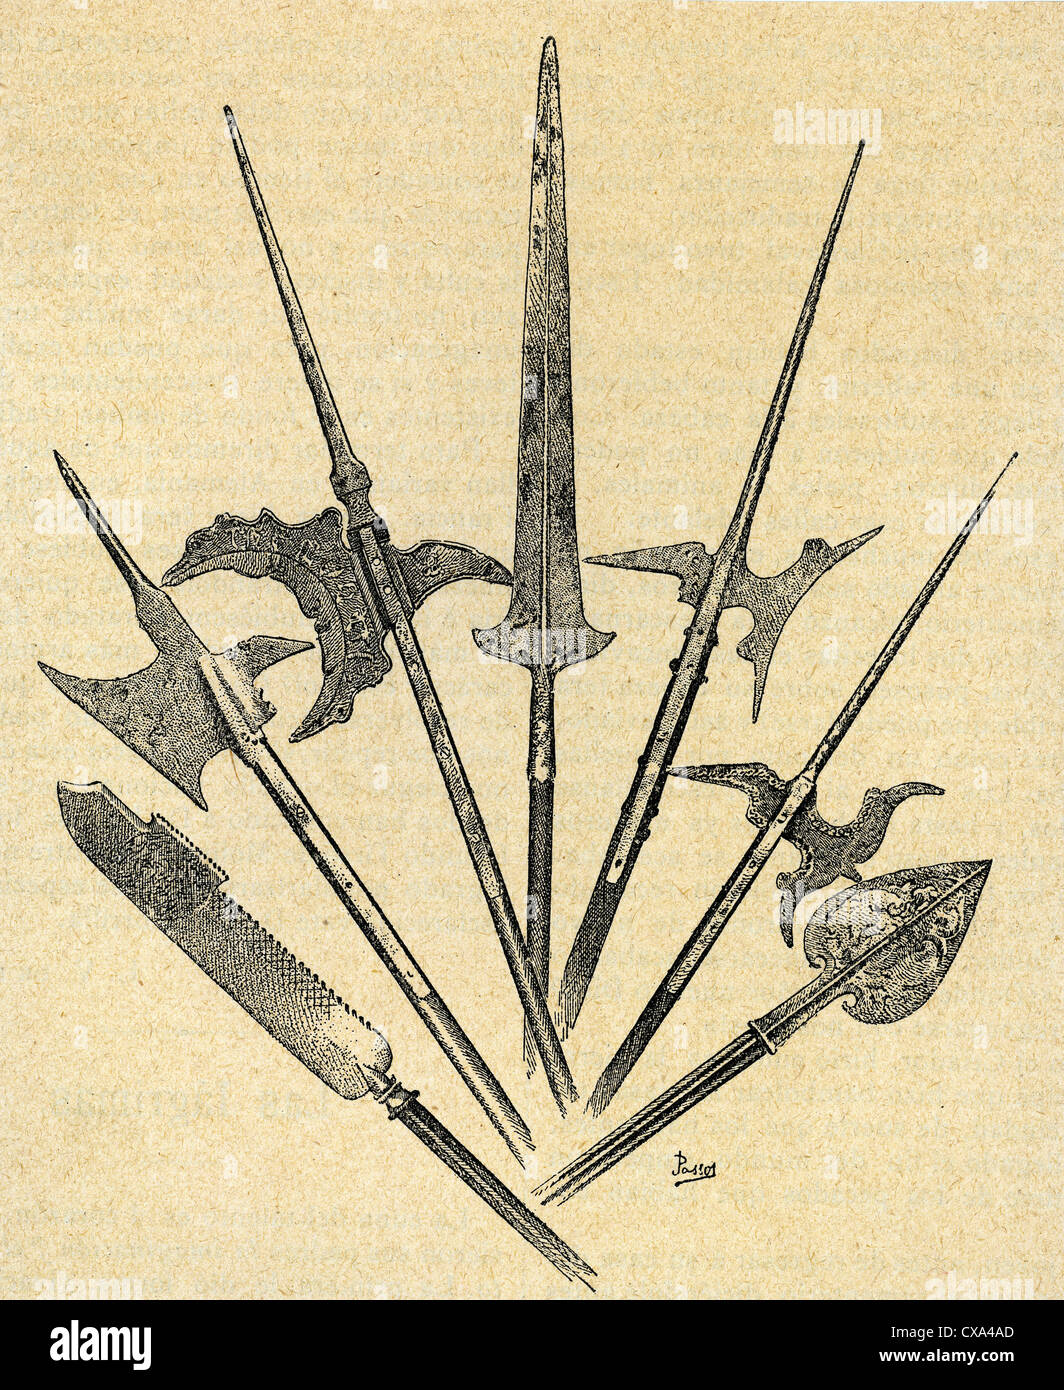 Weapons. Halberds and spearhead. Engraving. Stock Photo